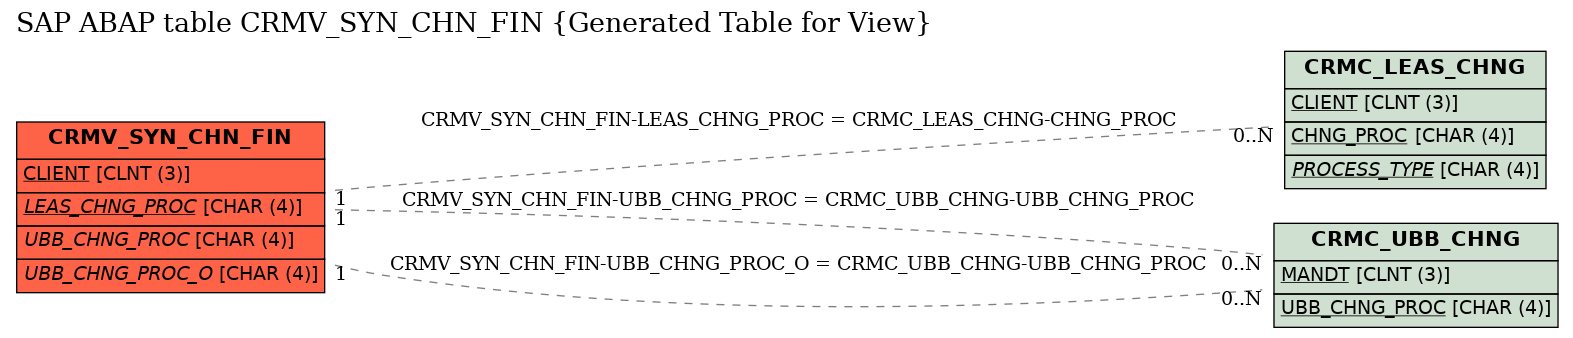 E-R Diagram for table CRMV_SYN_CHN_FIN (Generated Table for View)